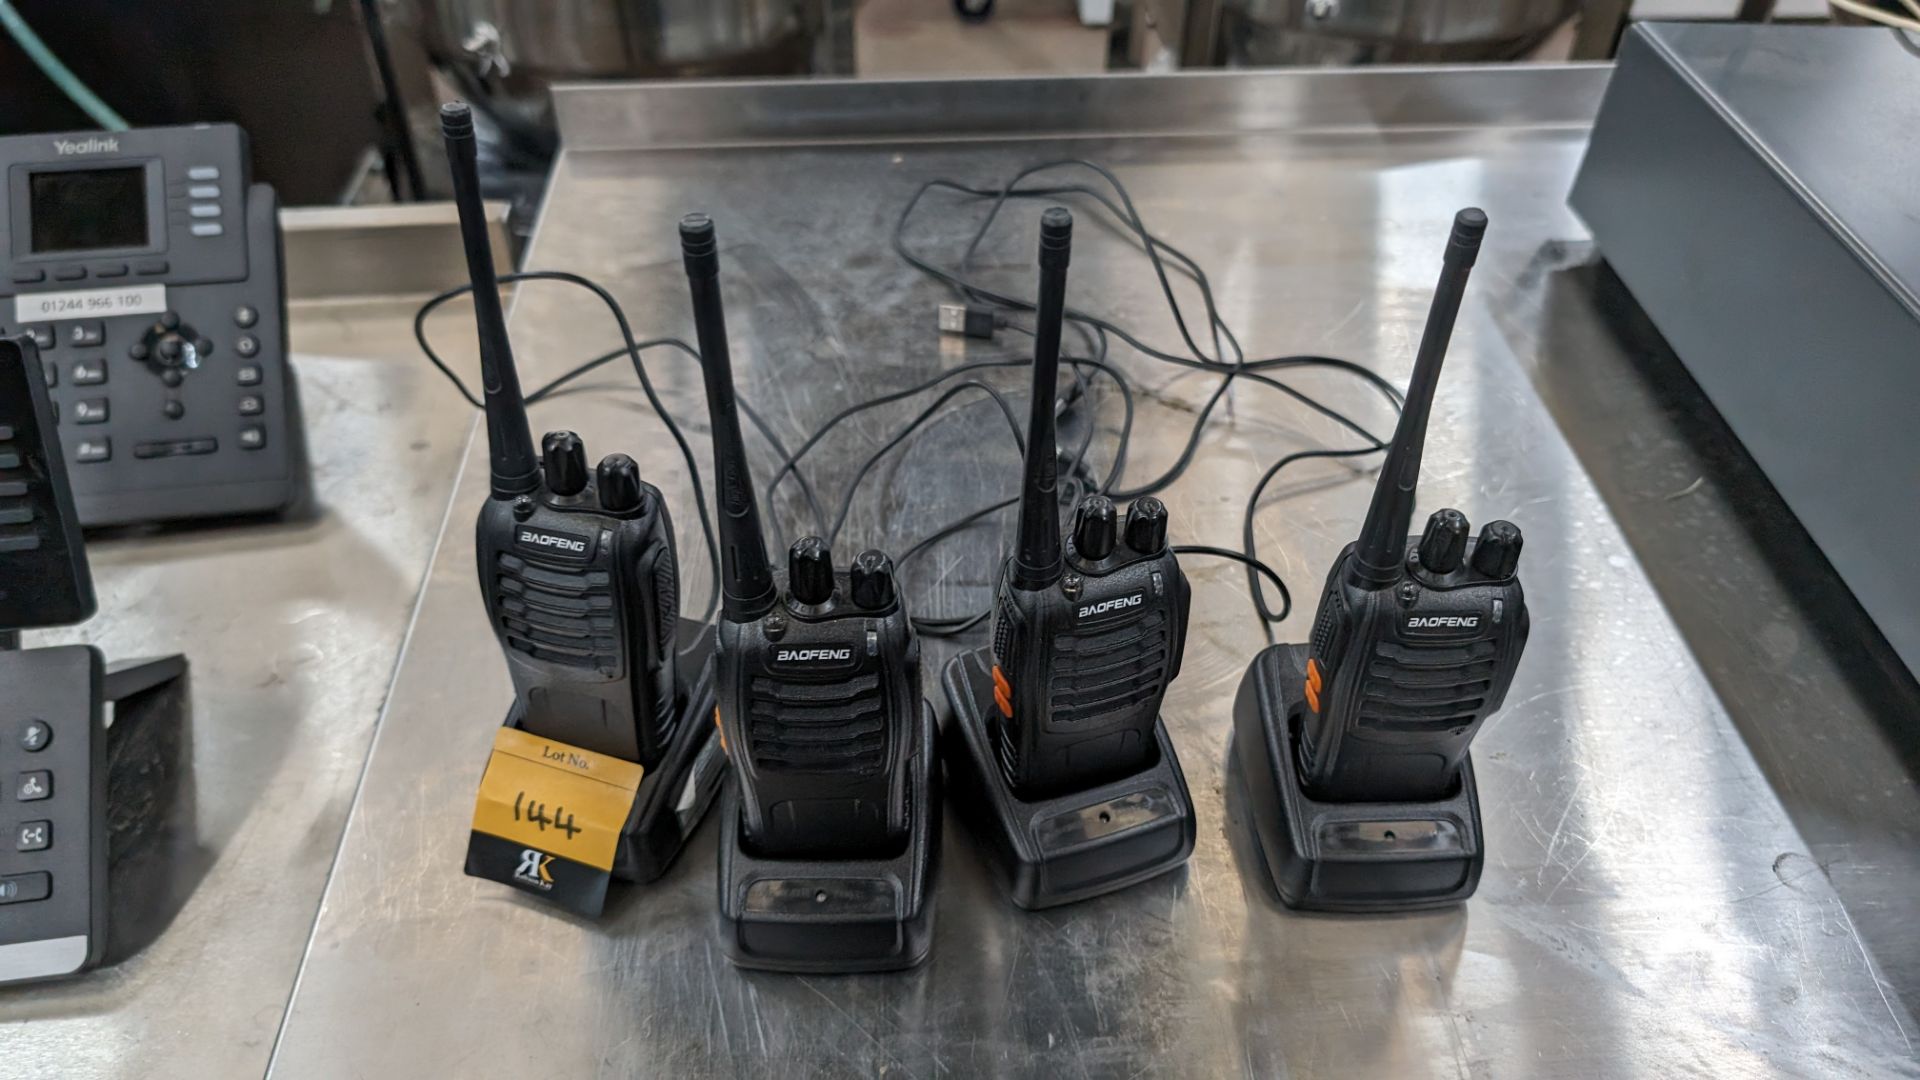 4 off Baofeng walkie-talkies each with their own charging base